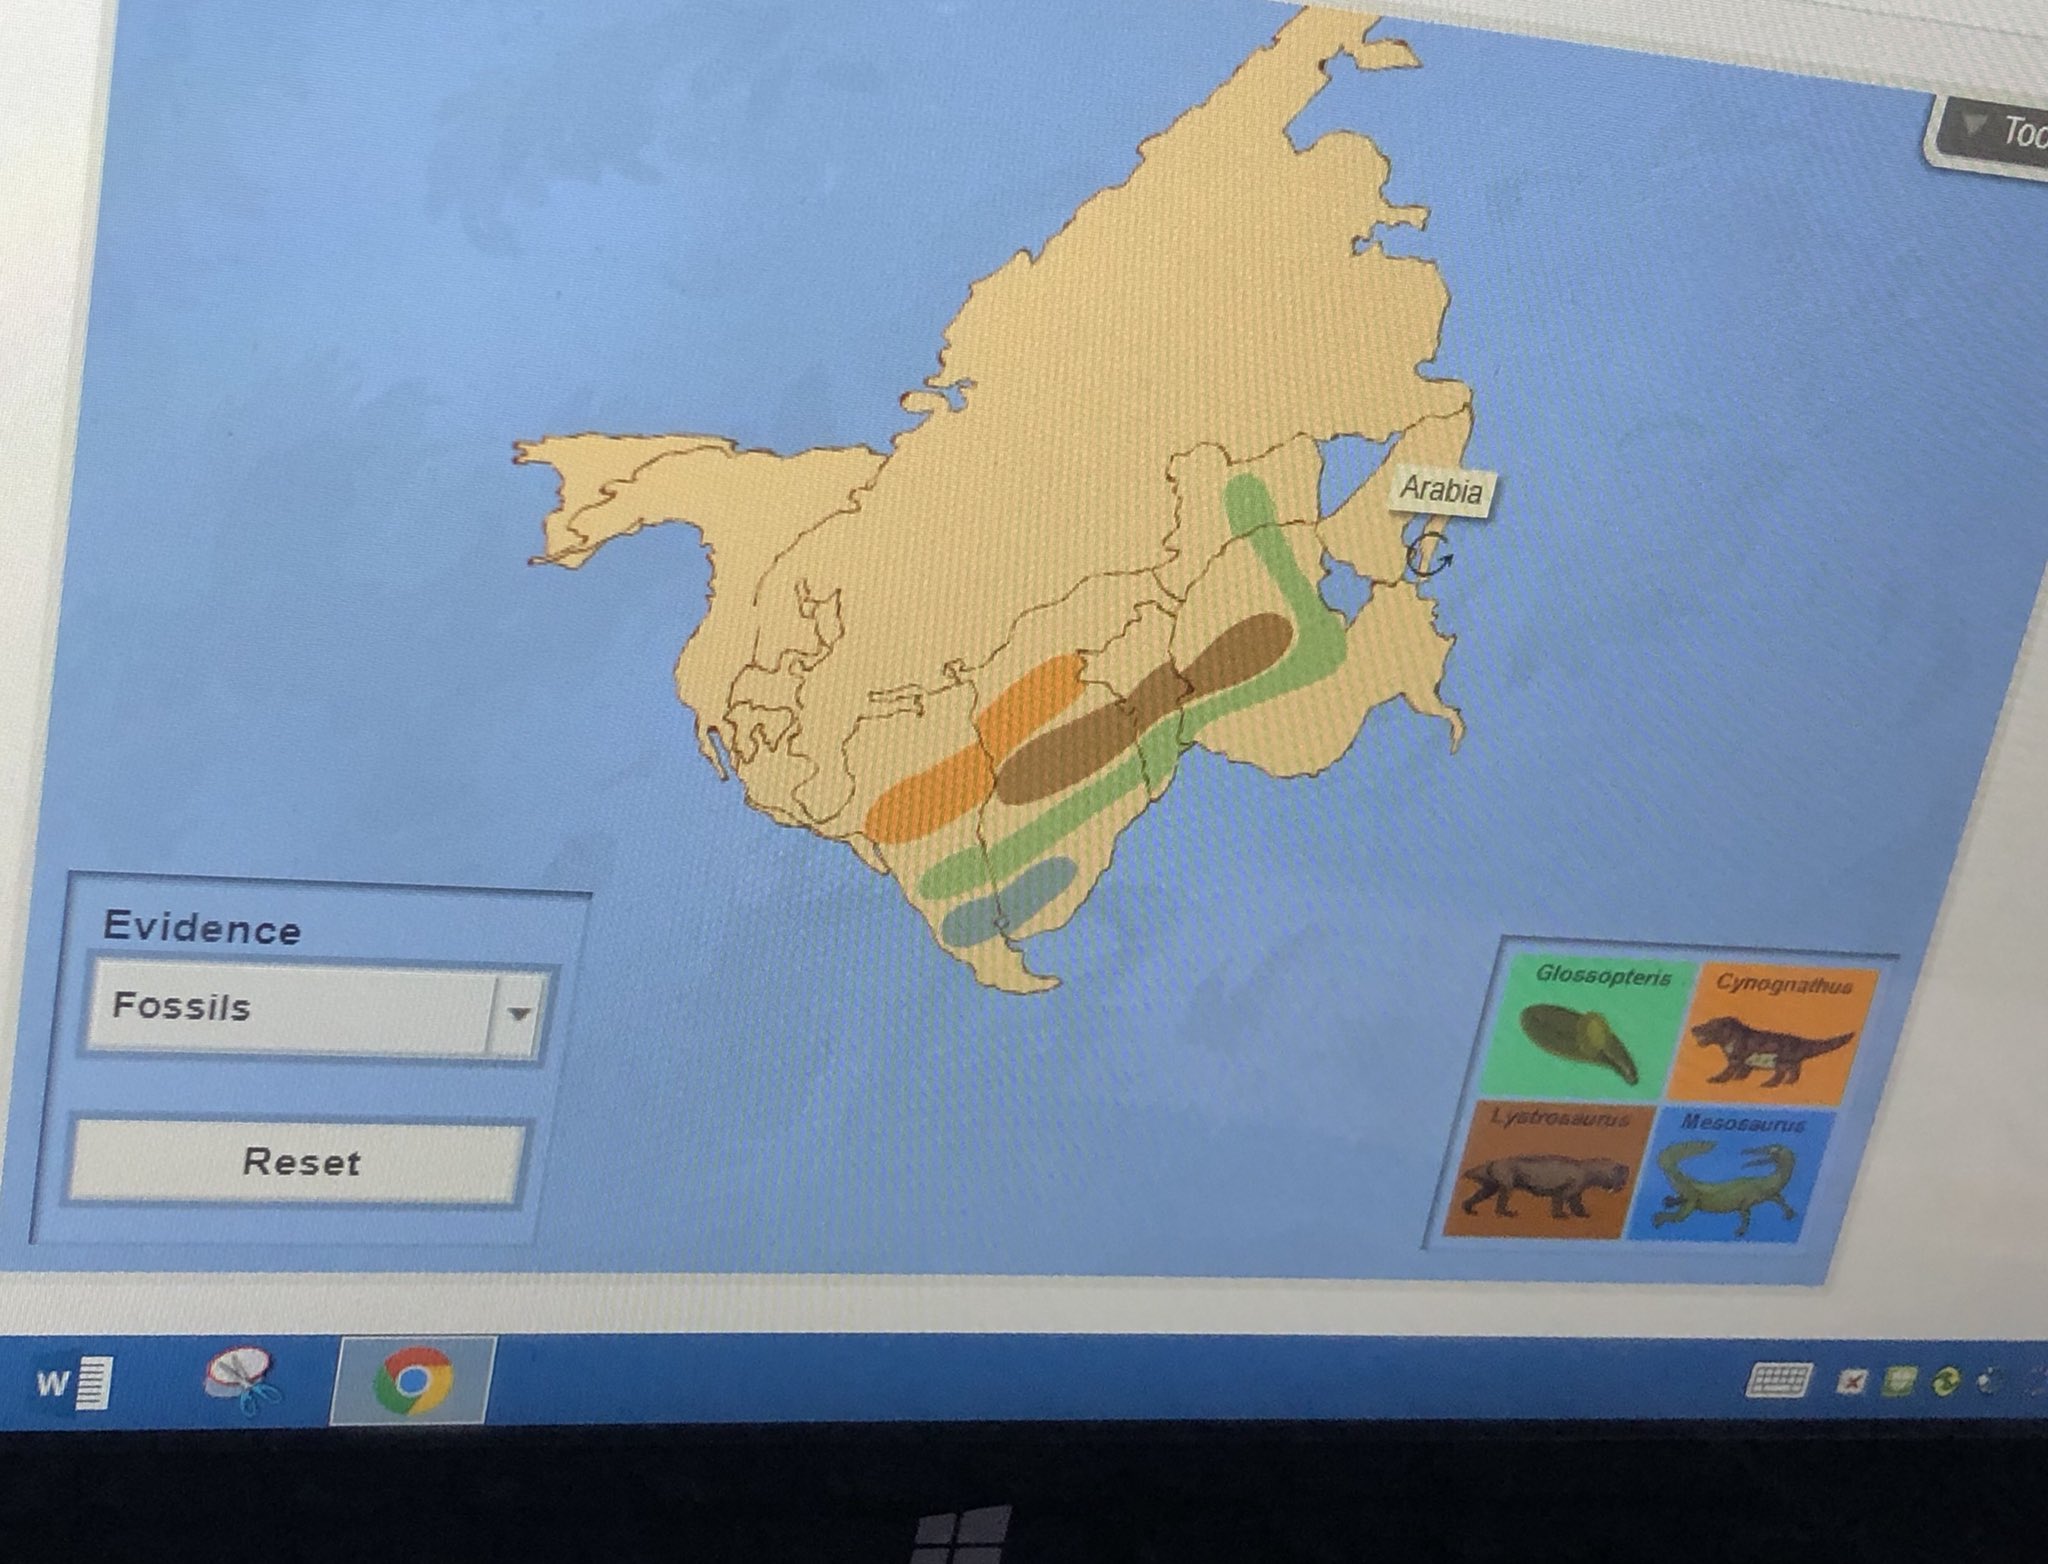 Shobica Wadhwa On Twitter It Was A Fun Challenge For Students To Build The Super Continent Pangaea On Explorelearning Today Platetectonics Continents As Puzzles Https T Co 1pvw6vgvzk